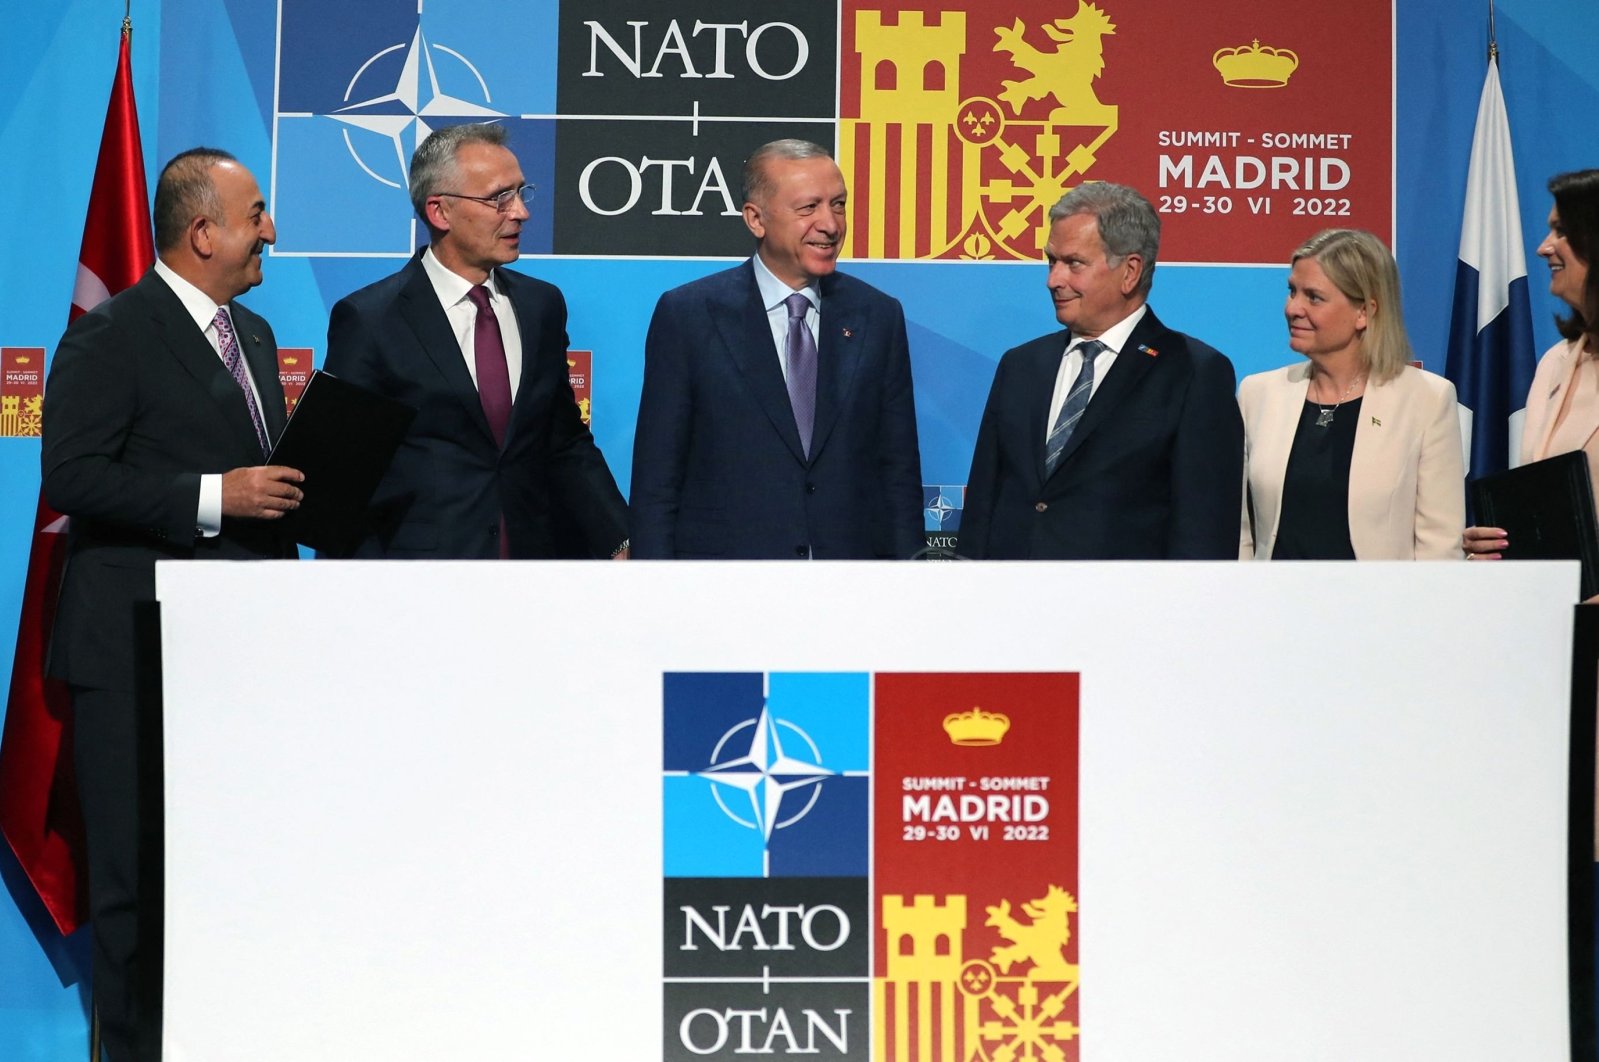 From left to right, Foreign Minister Mevlüt Çavuşoğlu, NATO Secretary-General Jens Stoltenberg, President Recep Tayyip Erdoğan, Finland&#039;s President Sauli Niinisto, Sweden&#039;s Prime Minister Magdalena Andersson and Swedish Foreign Minister Ann Linde pose for pictures after signing a memorandum during a NATO summit in Madrid, Spain, June 28, 2022. (Turkish Presidential Press Office via AFP)